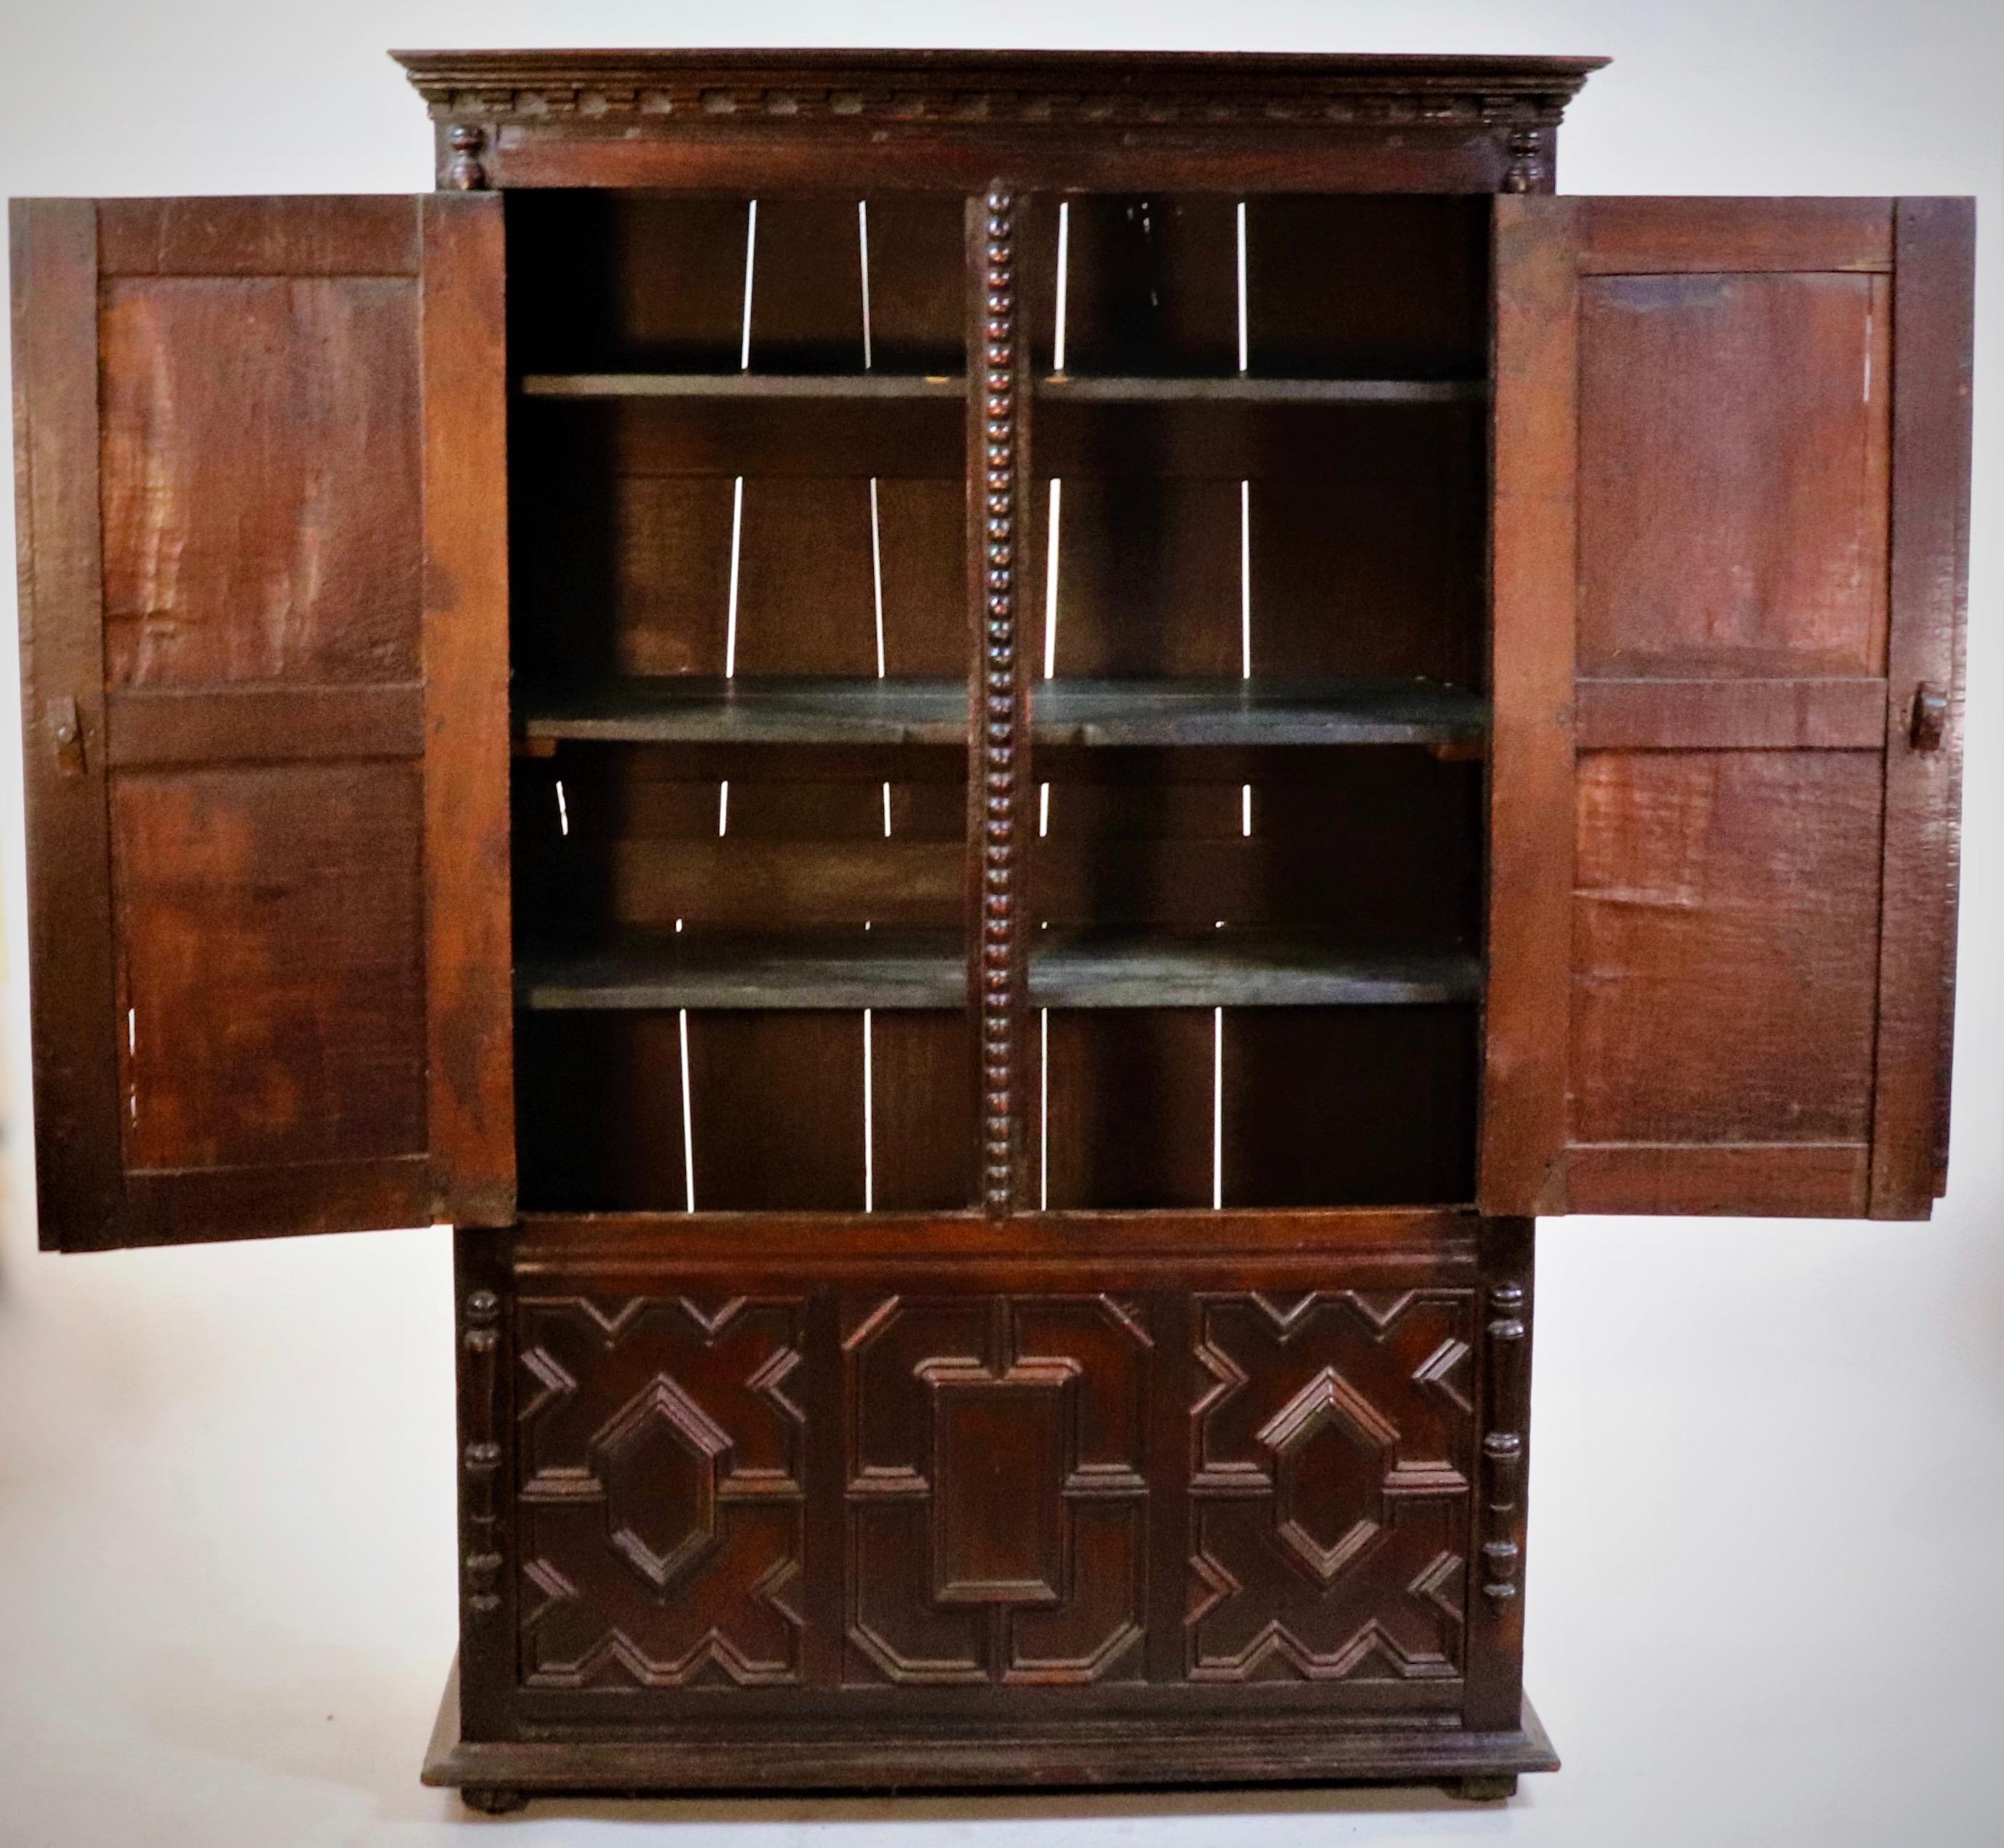 This is a circa 1660 Charles II English cupboard. This style was characterized by elaborate carvings and large frames. During Charles II's reign, there was a revival in the art and design of furniture-making, despite the challenges that arose from